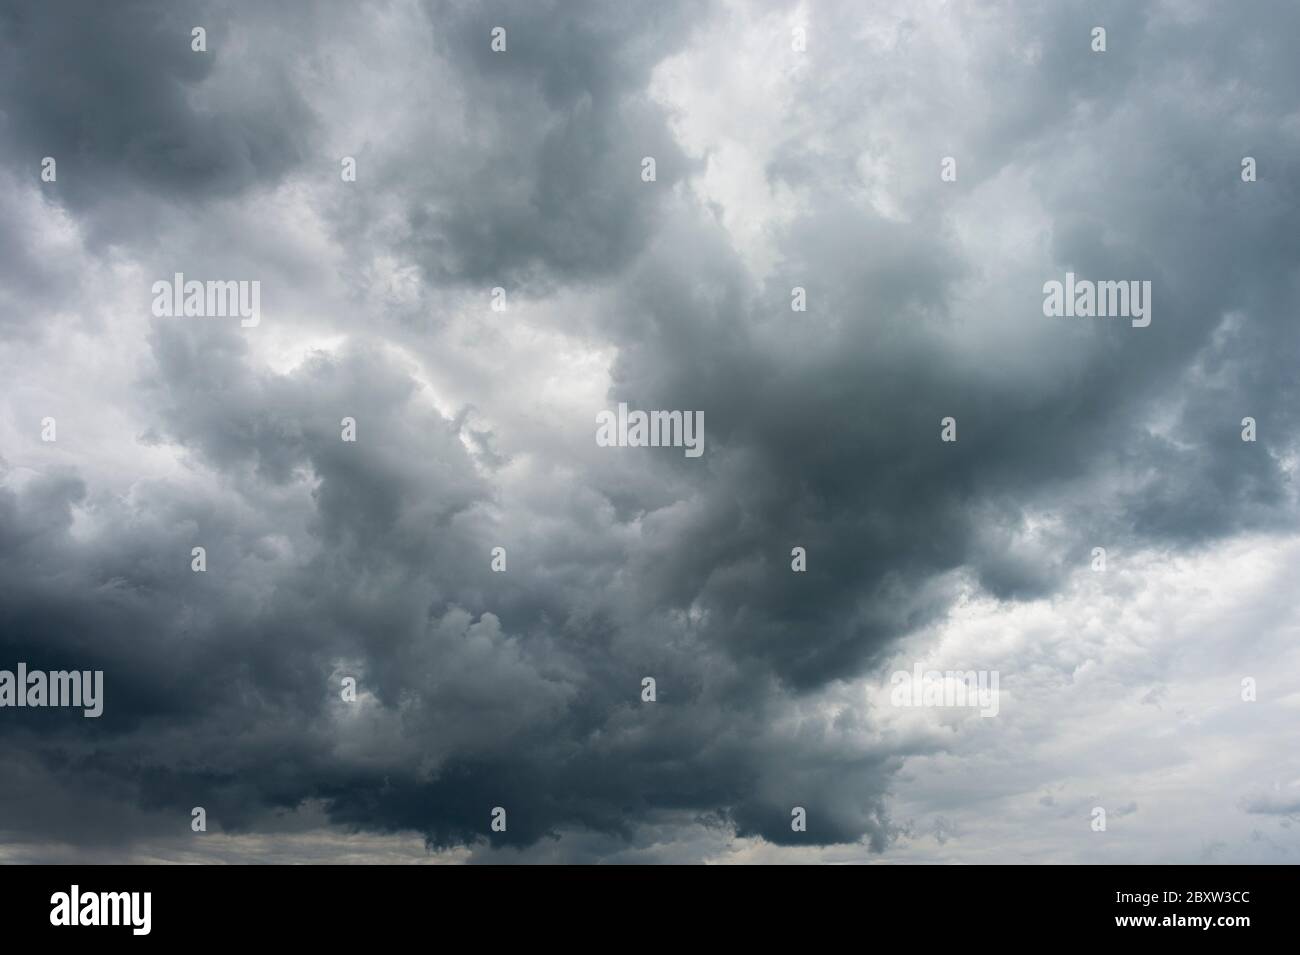 Dark storm clouds before rain used for climate background. Clouds become dark gray before raining. Abstract dramatic background Stock Photo